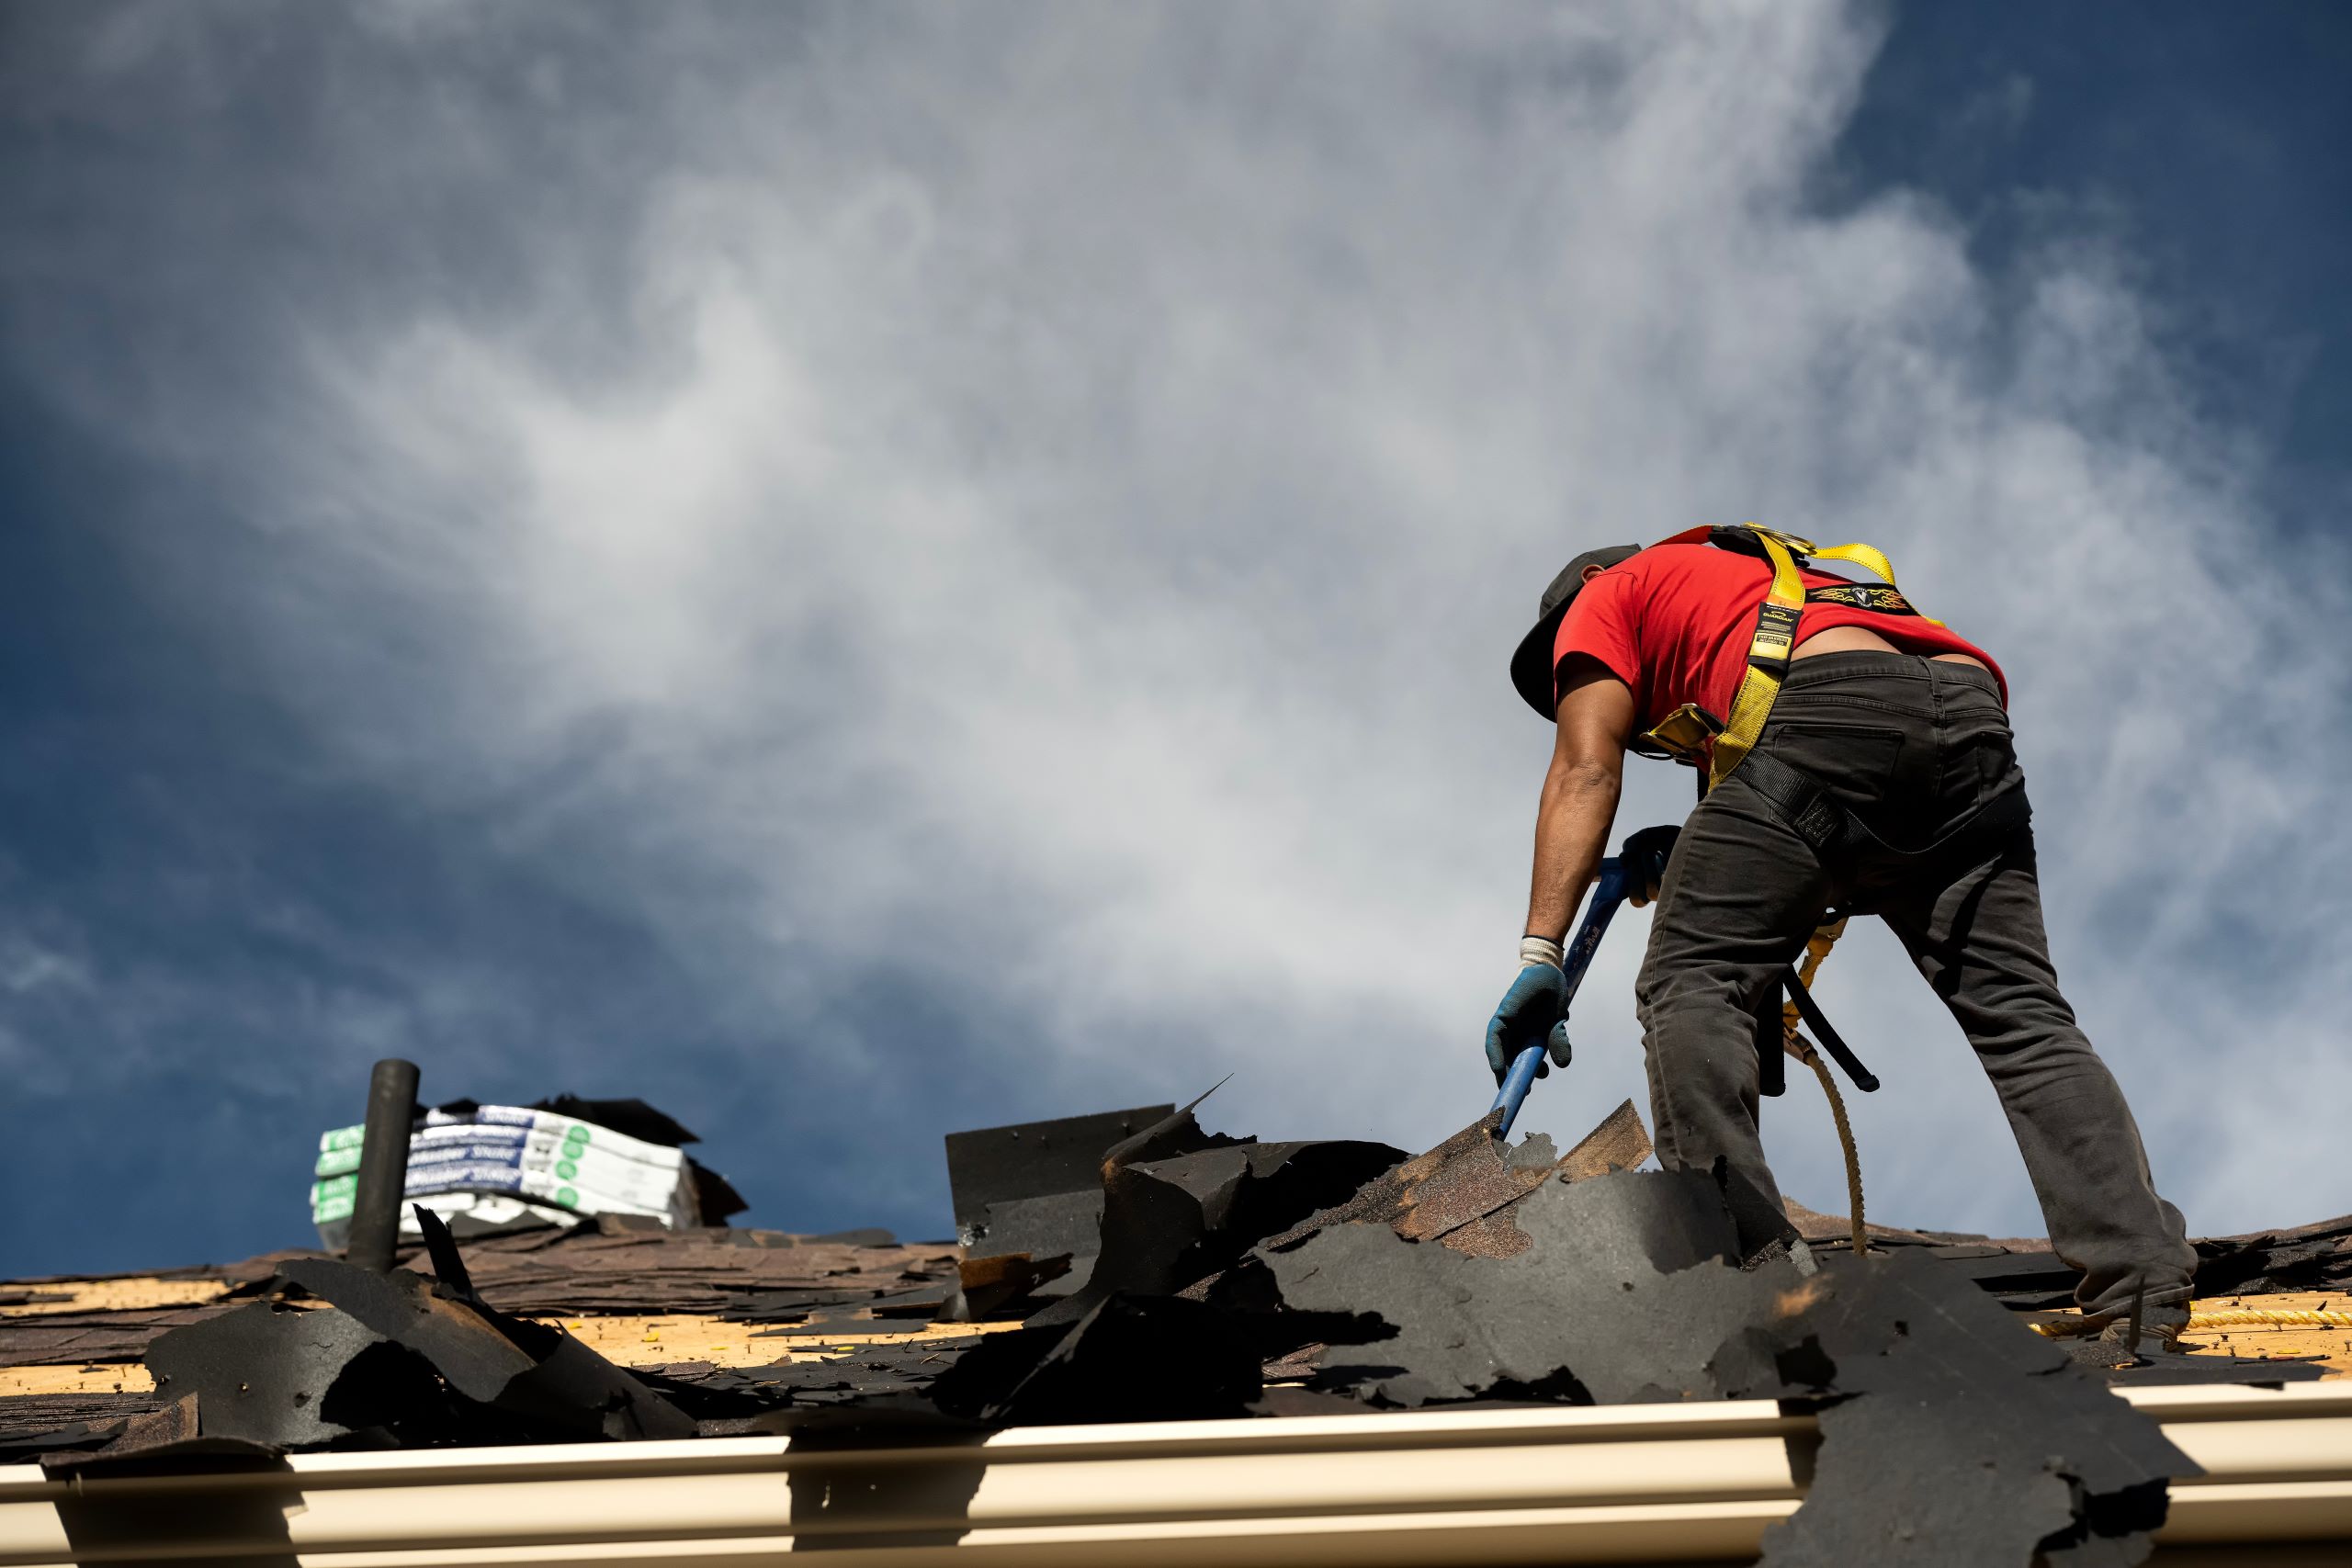 A hail damage roofing contractor in a red shirt and safety gear repairs a roof under a clear sky, removing damaged shingles caused by a recent hailstorm.